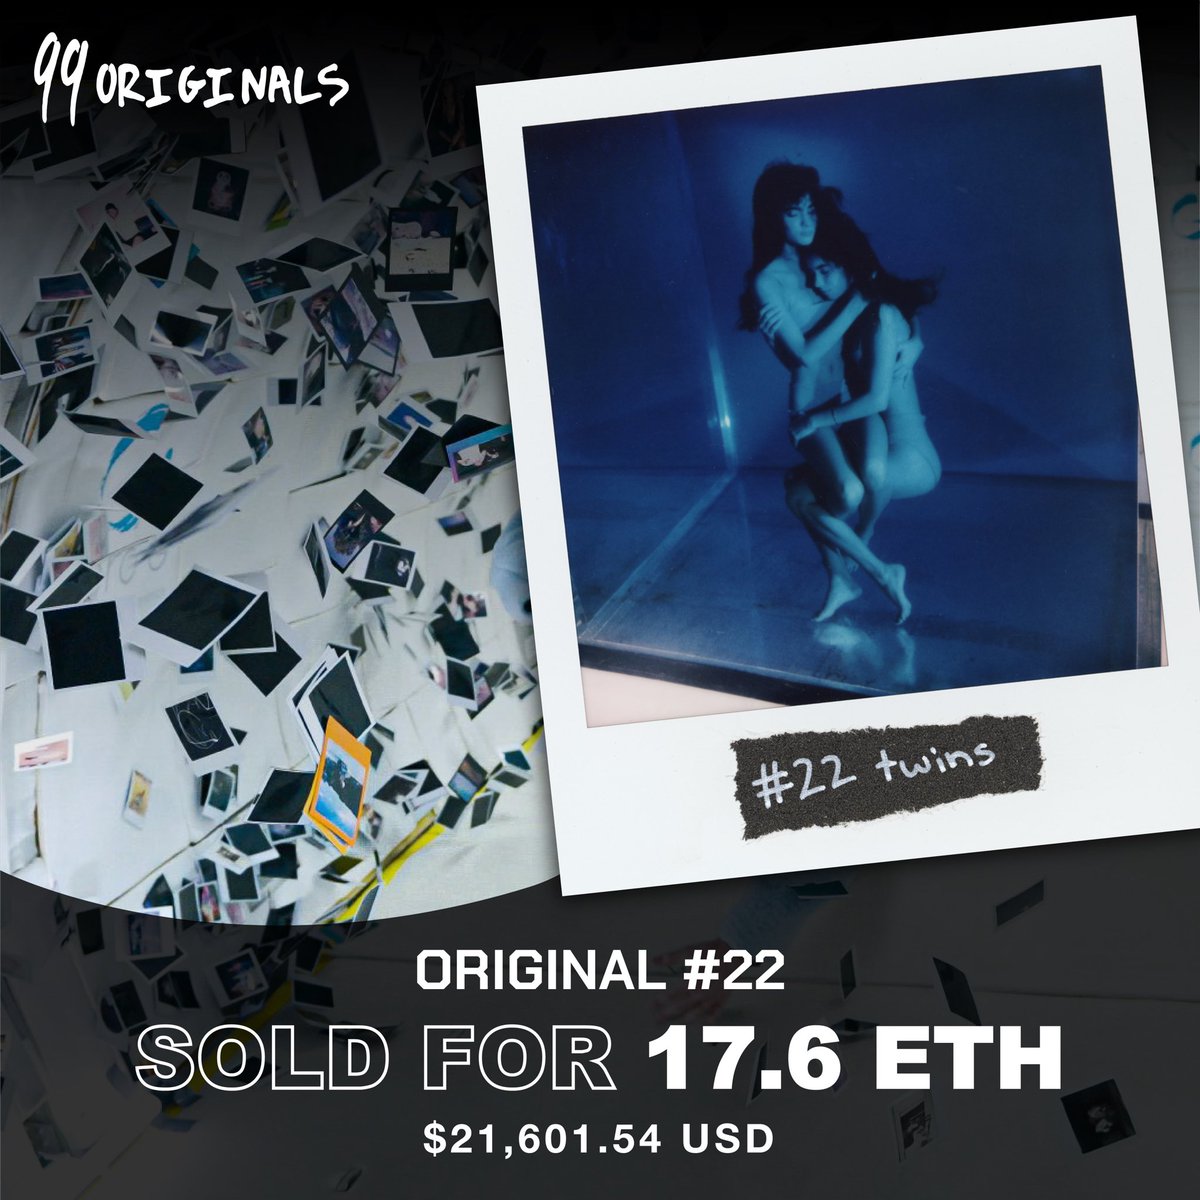 SOLD! Original #22 “twins” closes auction at 17.6 Eth ($21.6k USD)